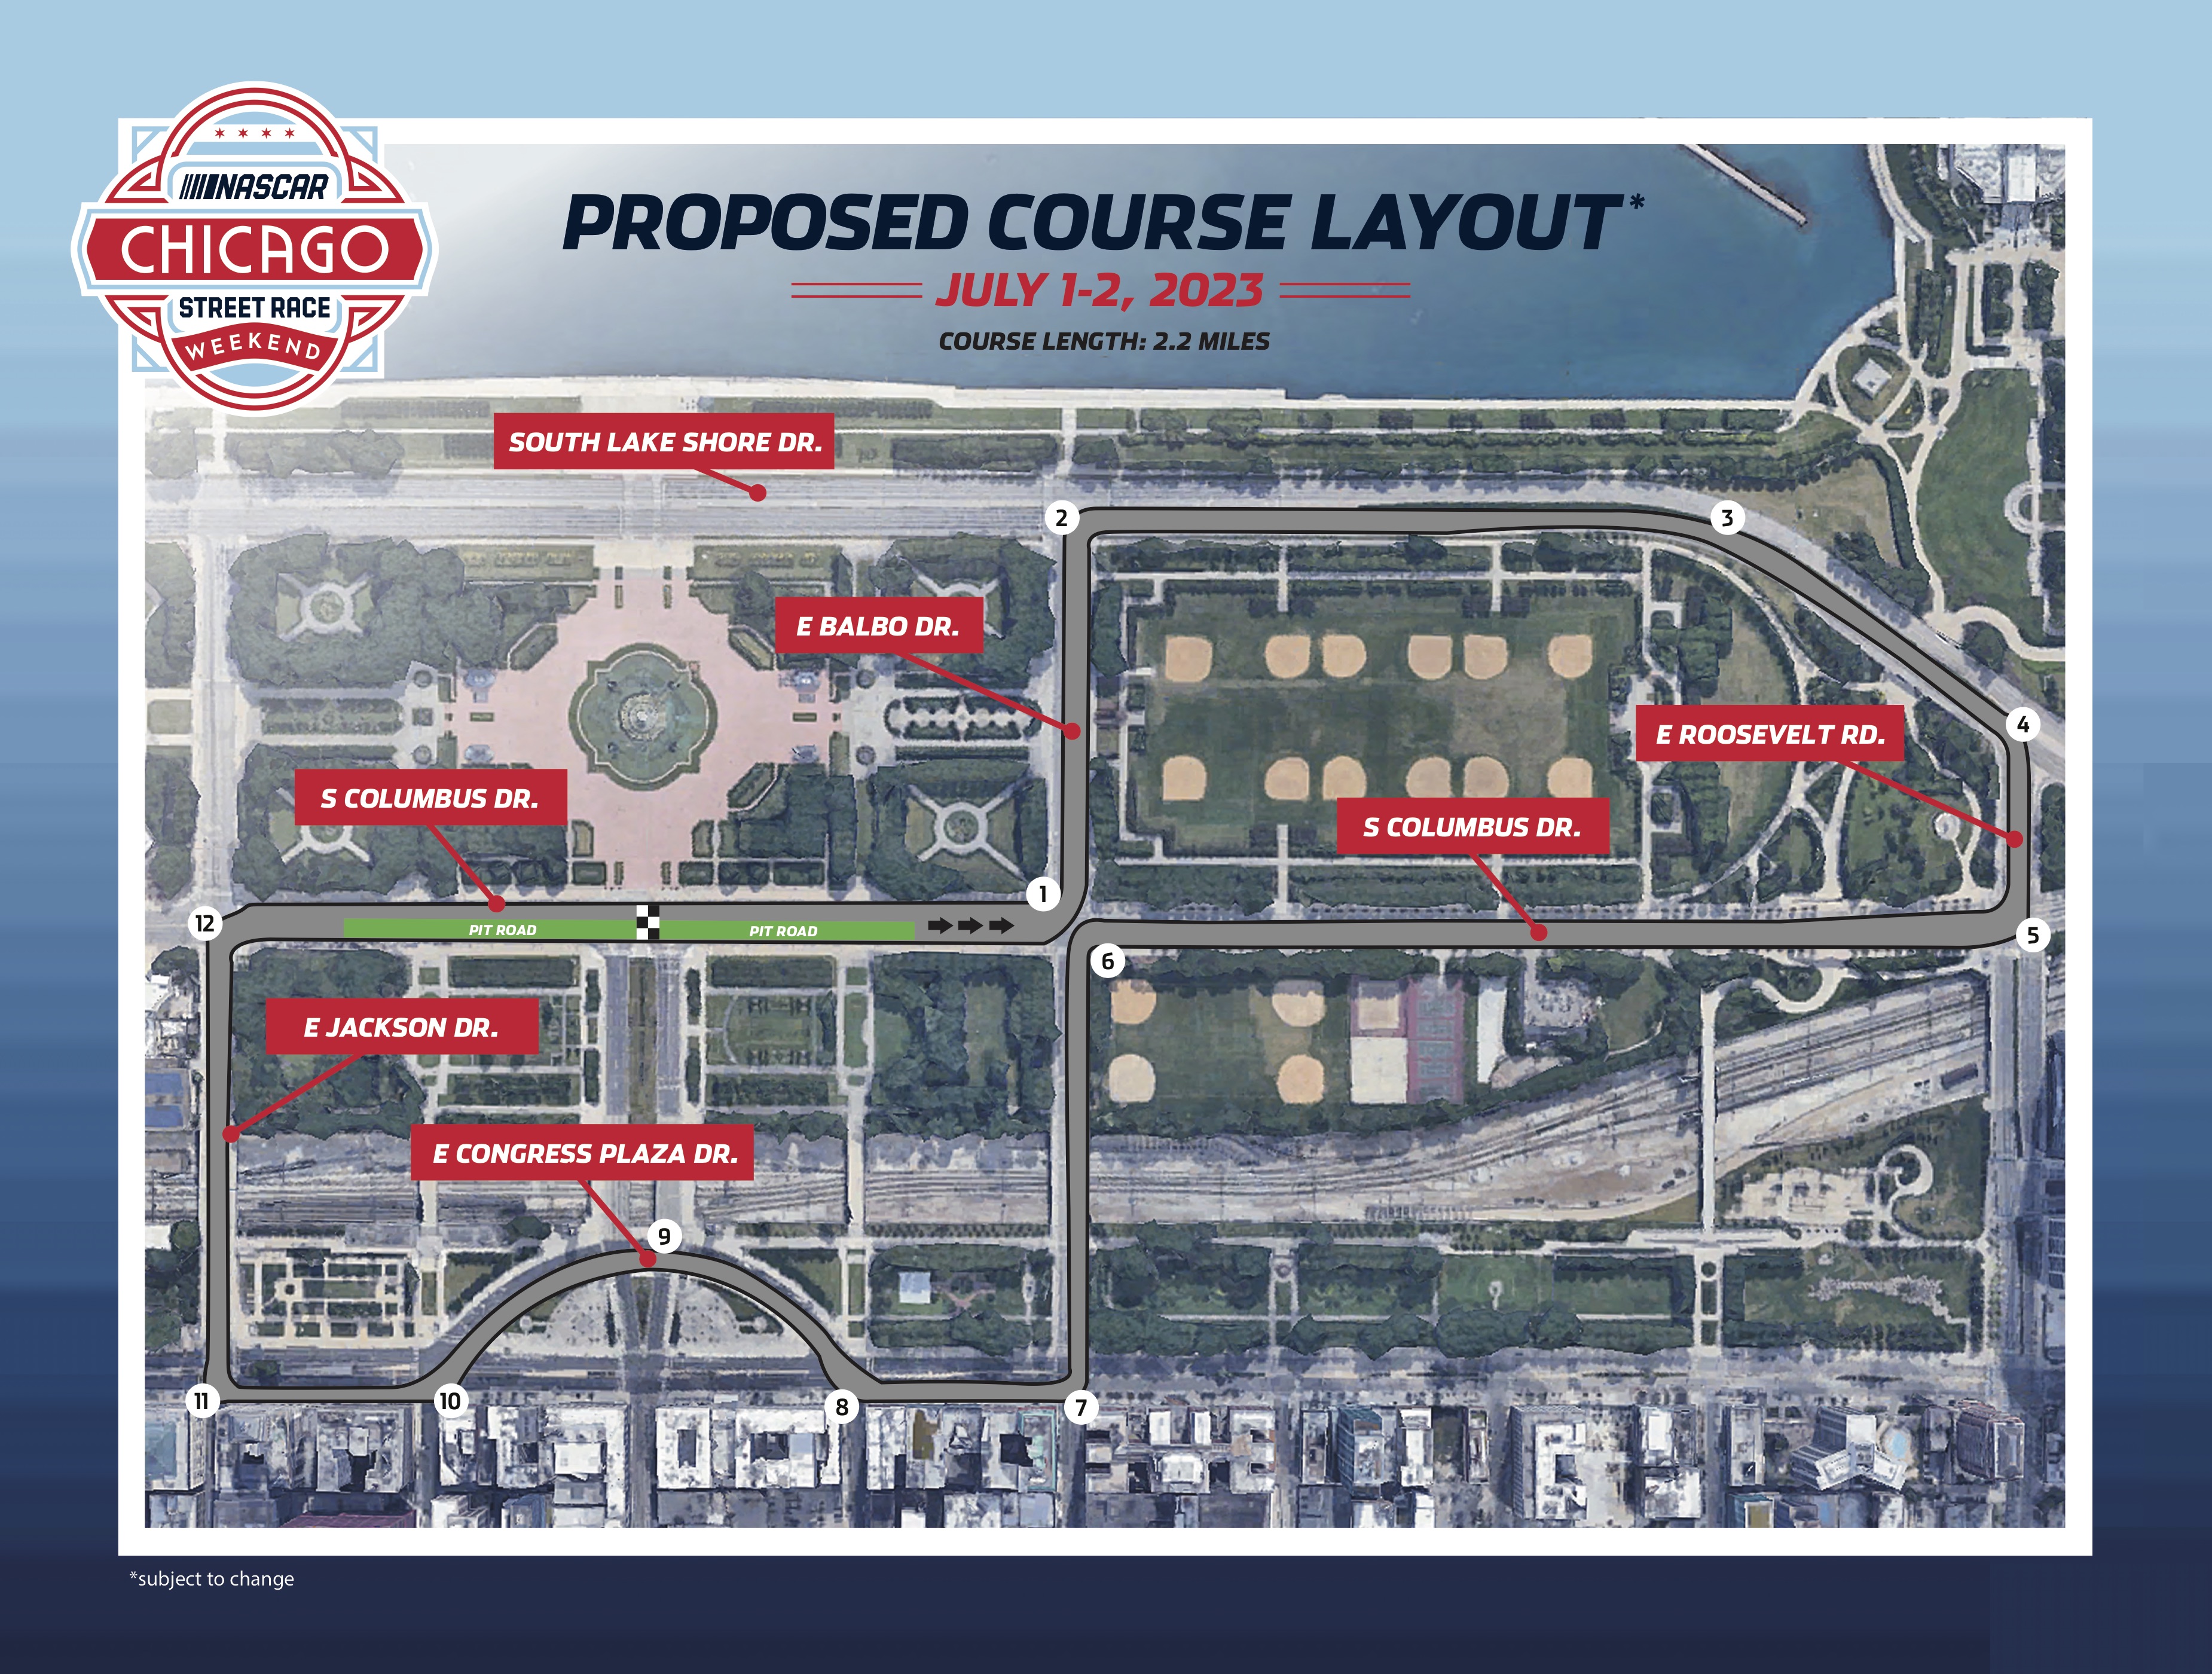 NASCAR Races Are Coming To Chicago's Streets Next Year — Here’s The Course